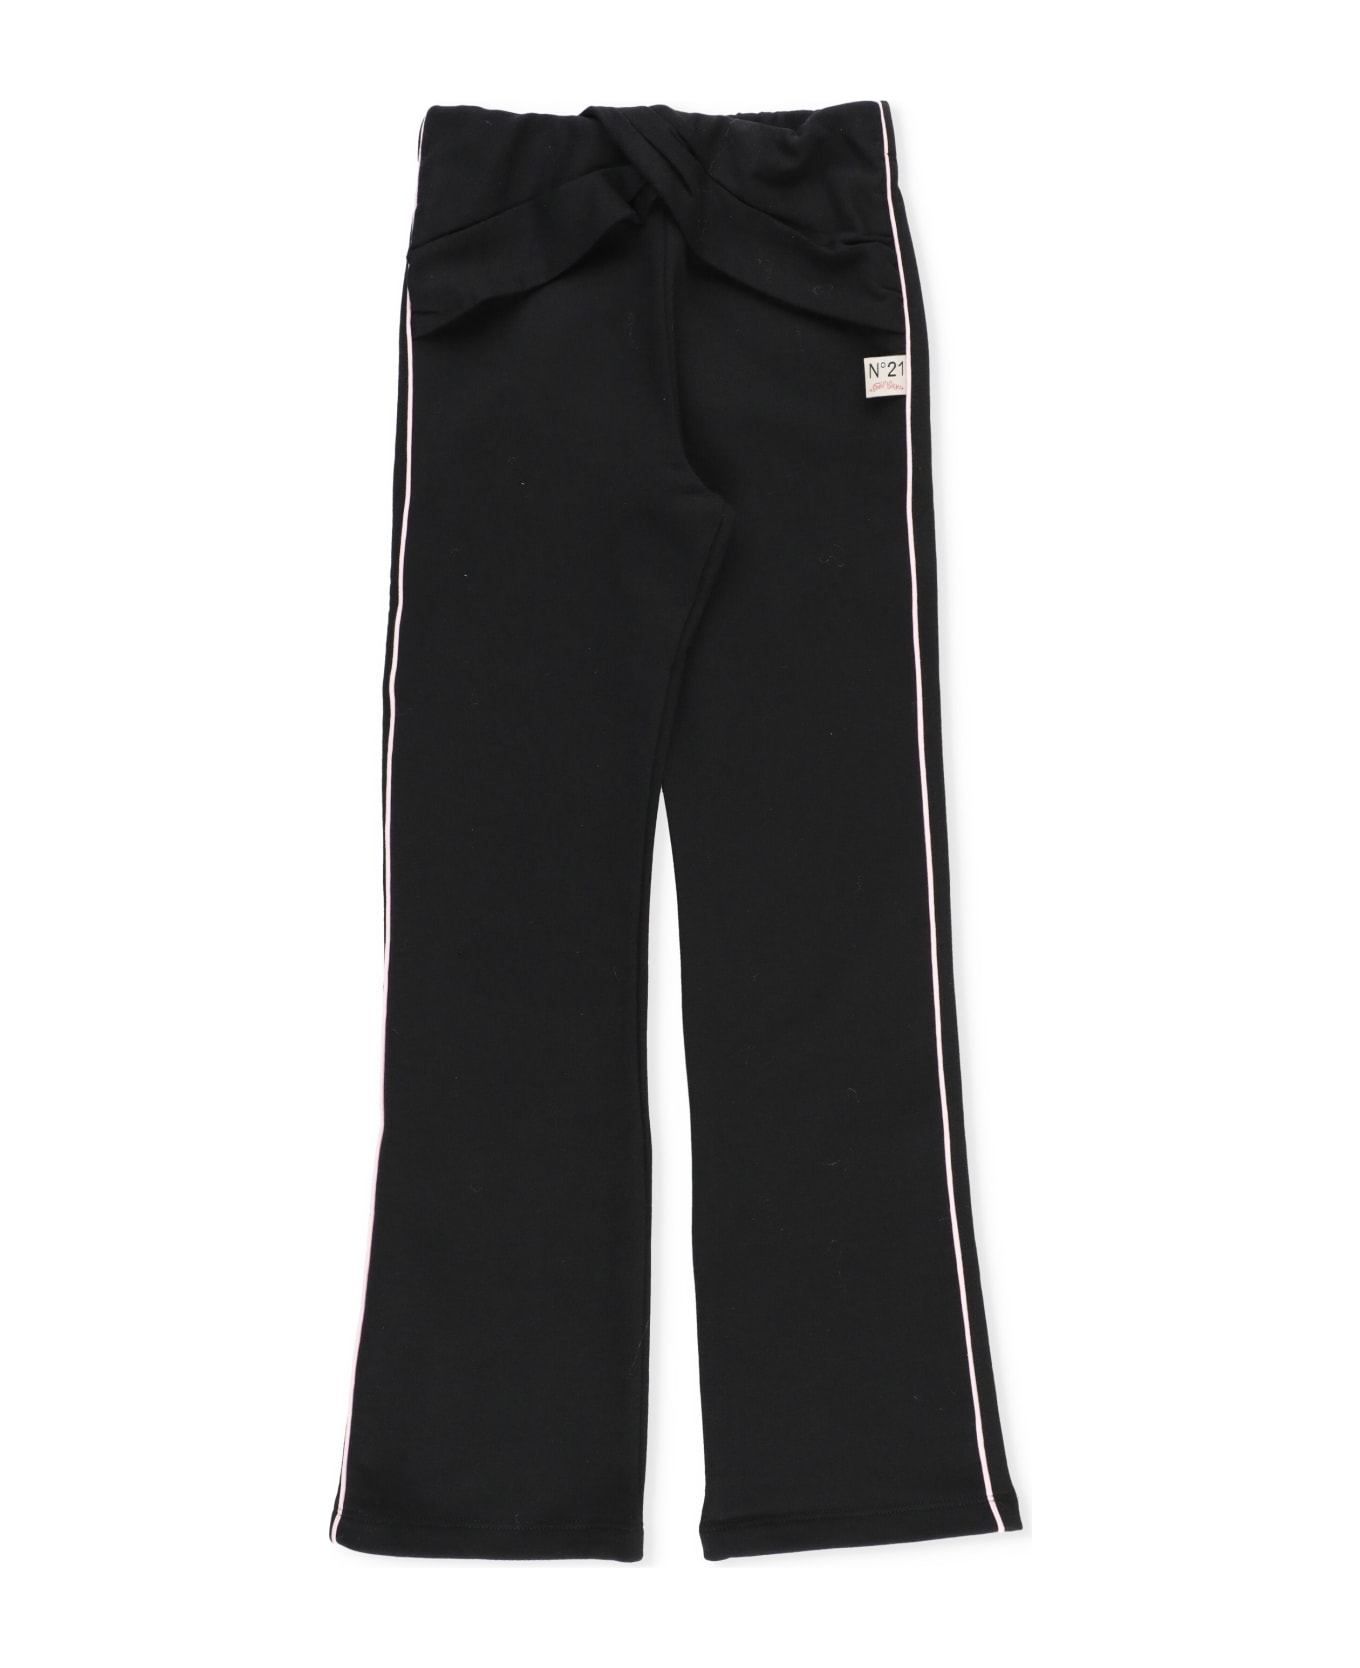 N.21 Cotton Trousers - Black ボトムス